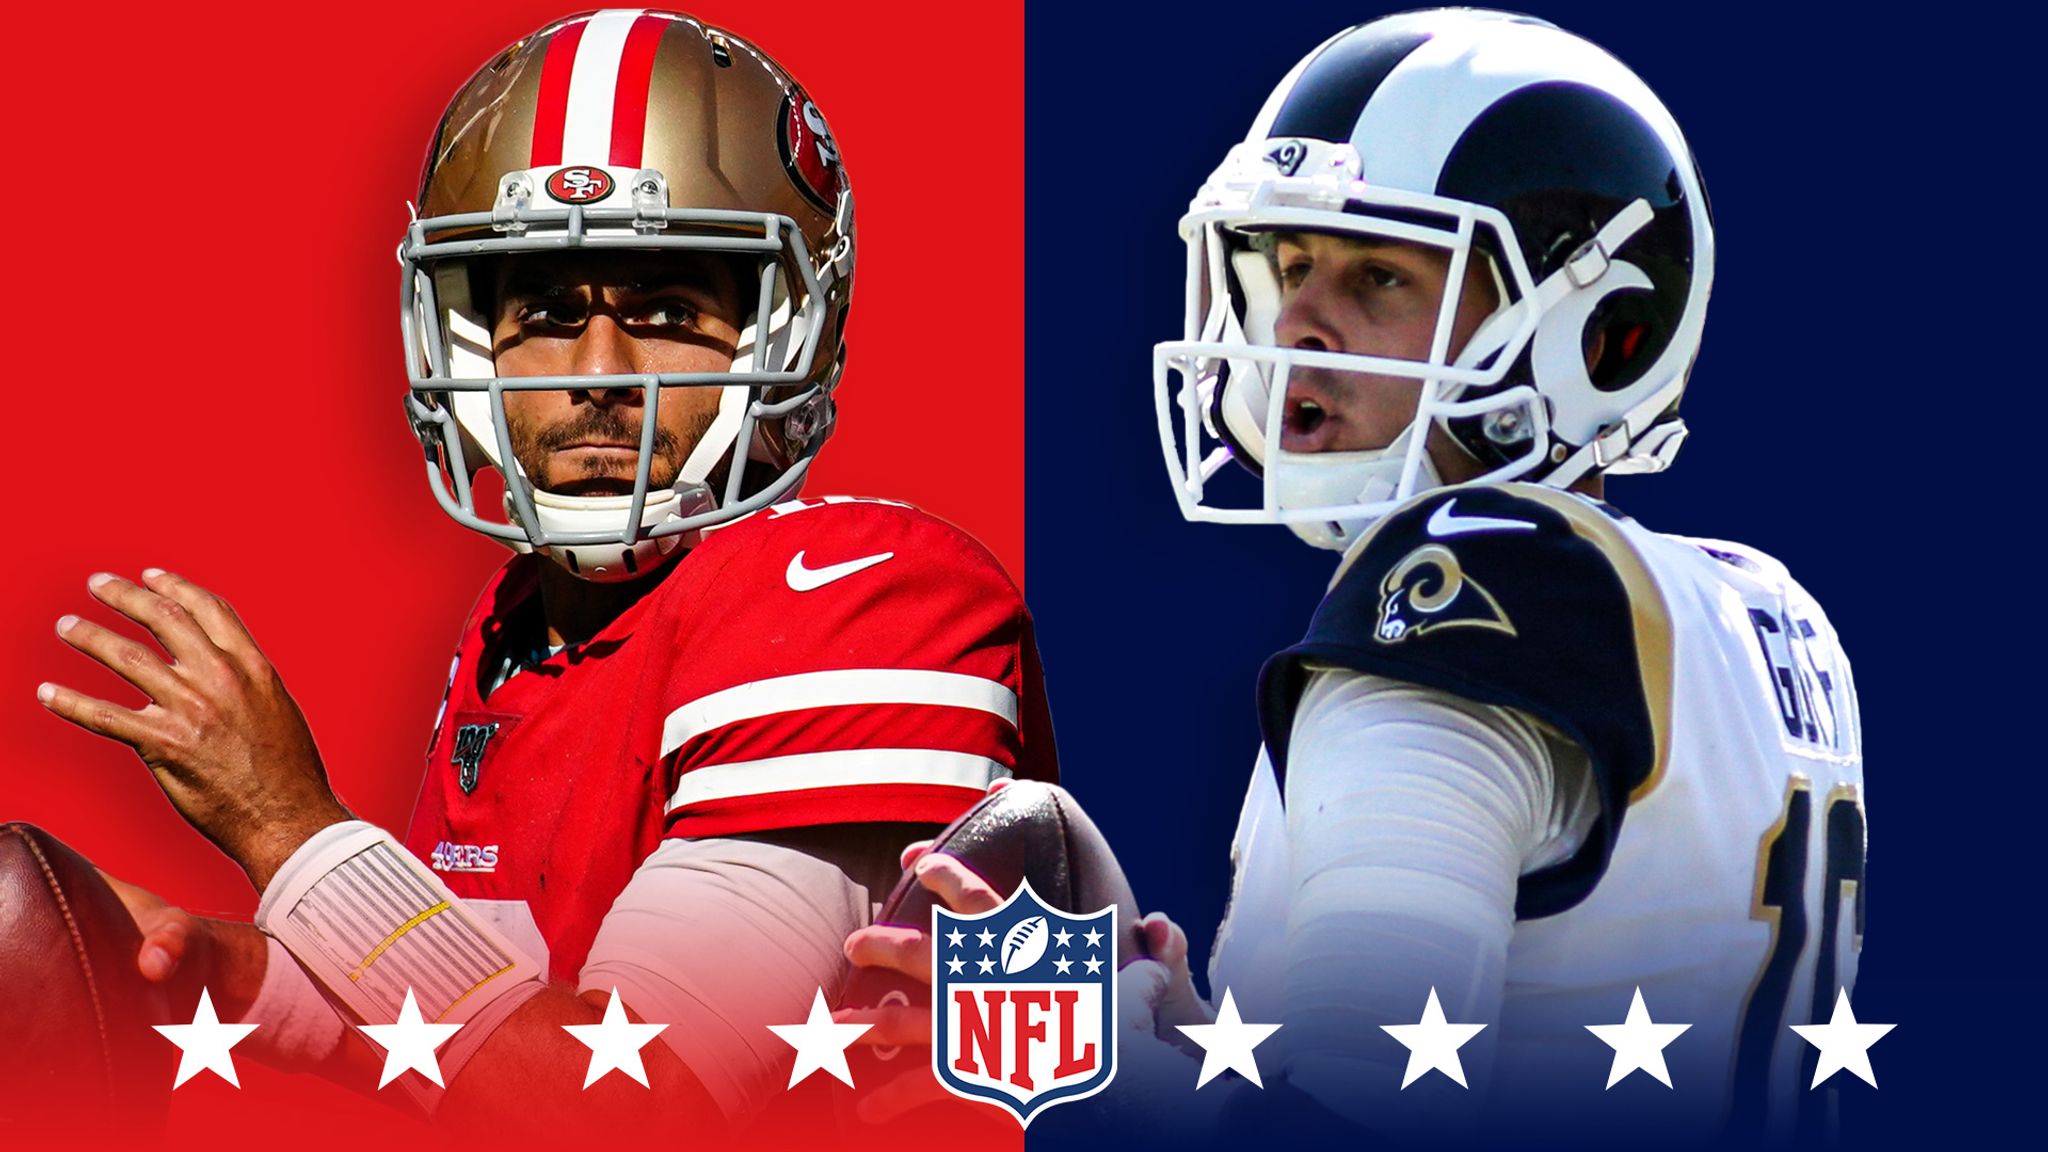 San Francisco 49ers @ Los Angeles Rams: Will 49ers stay undefeated